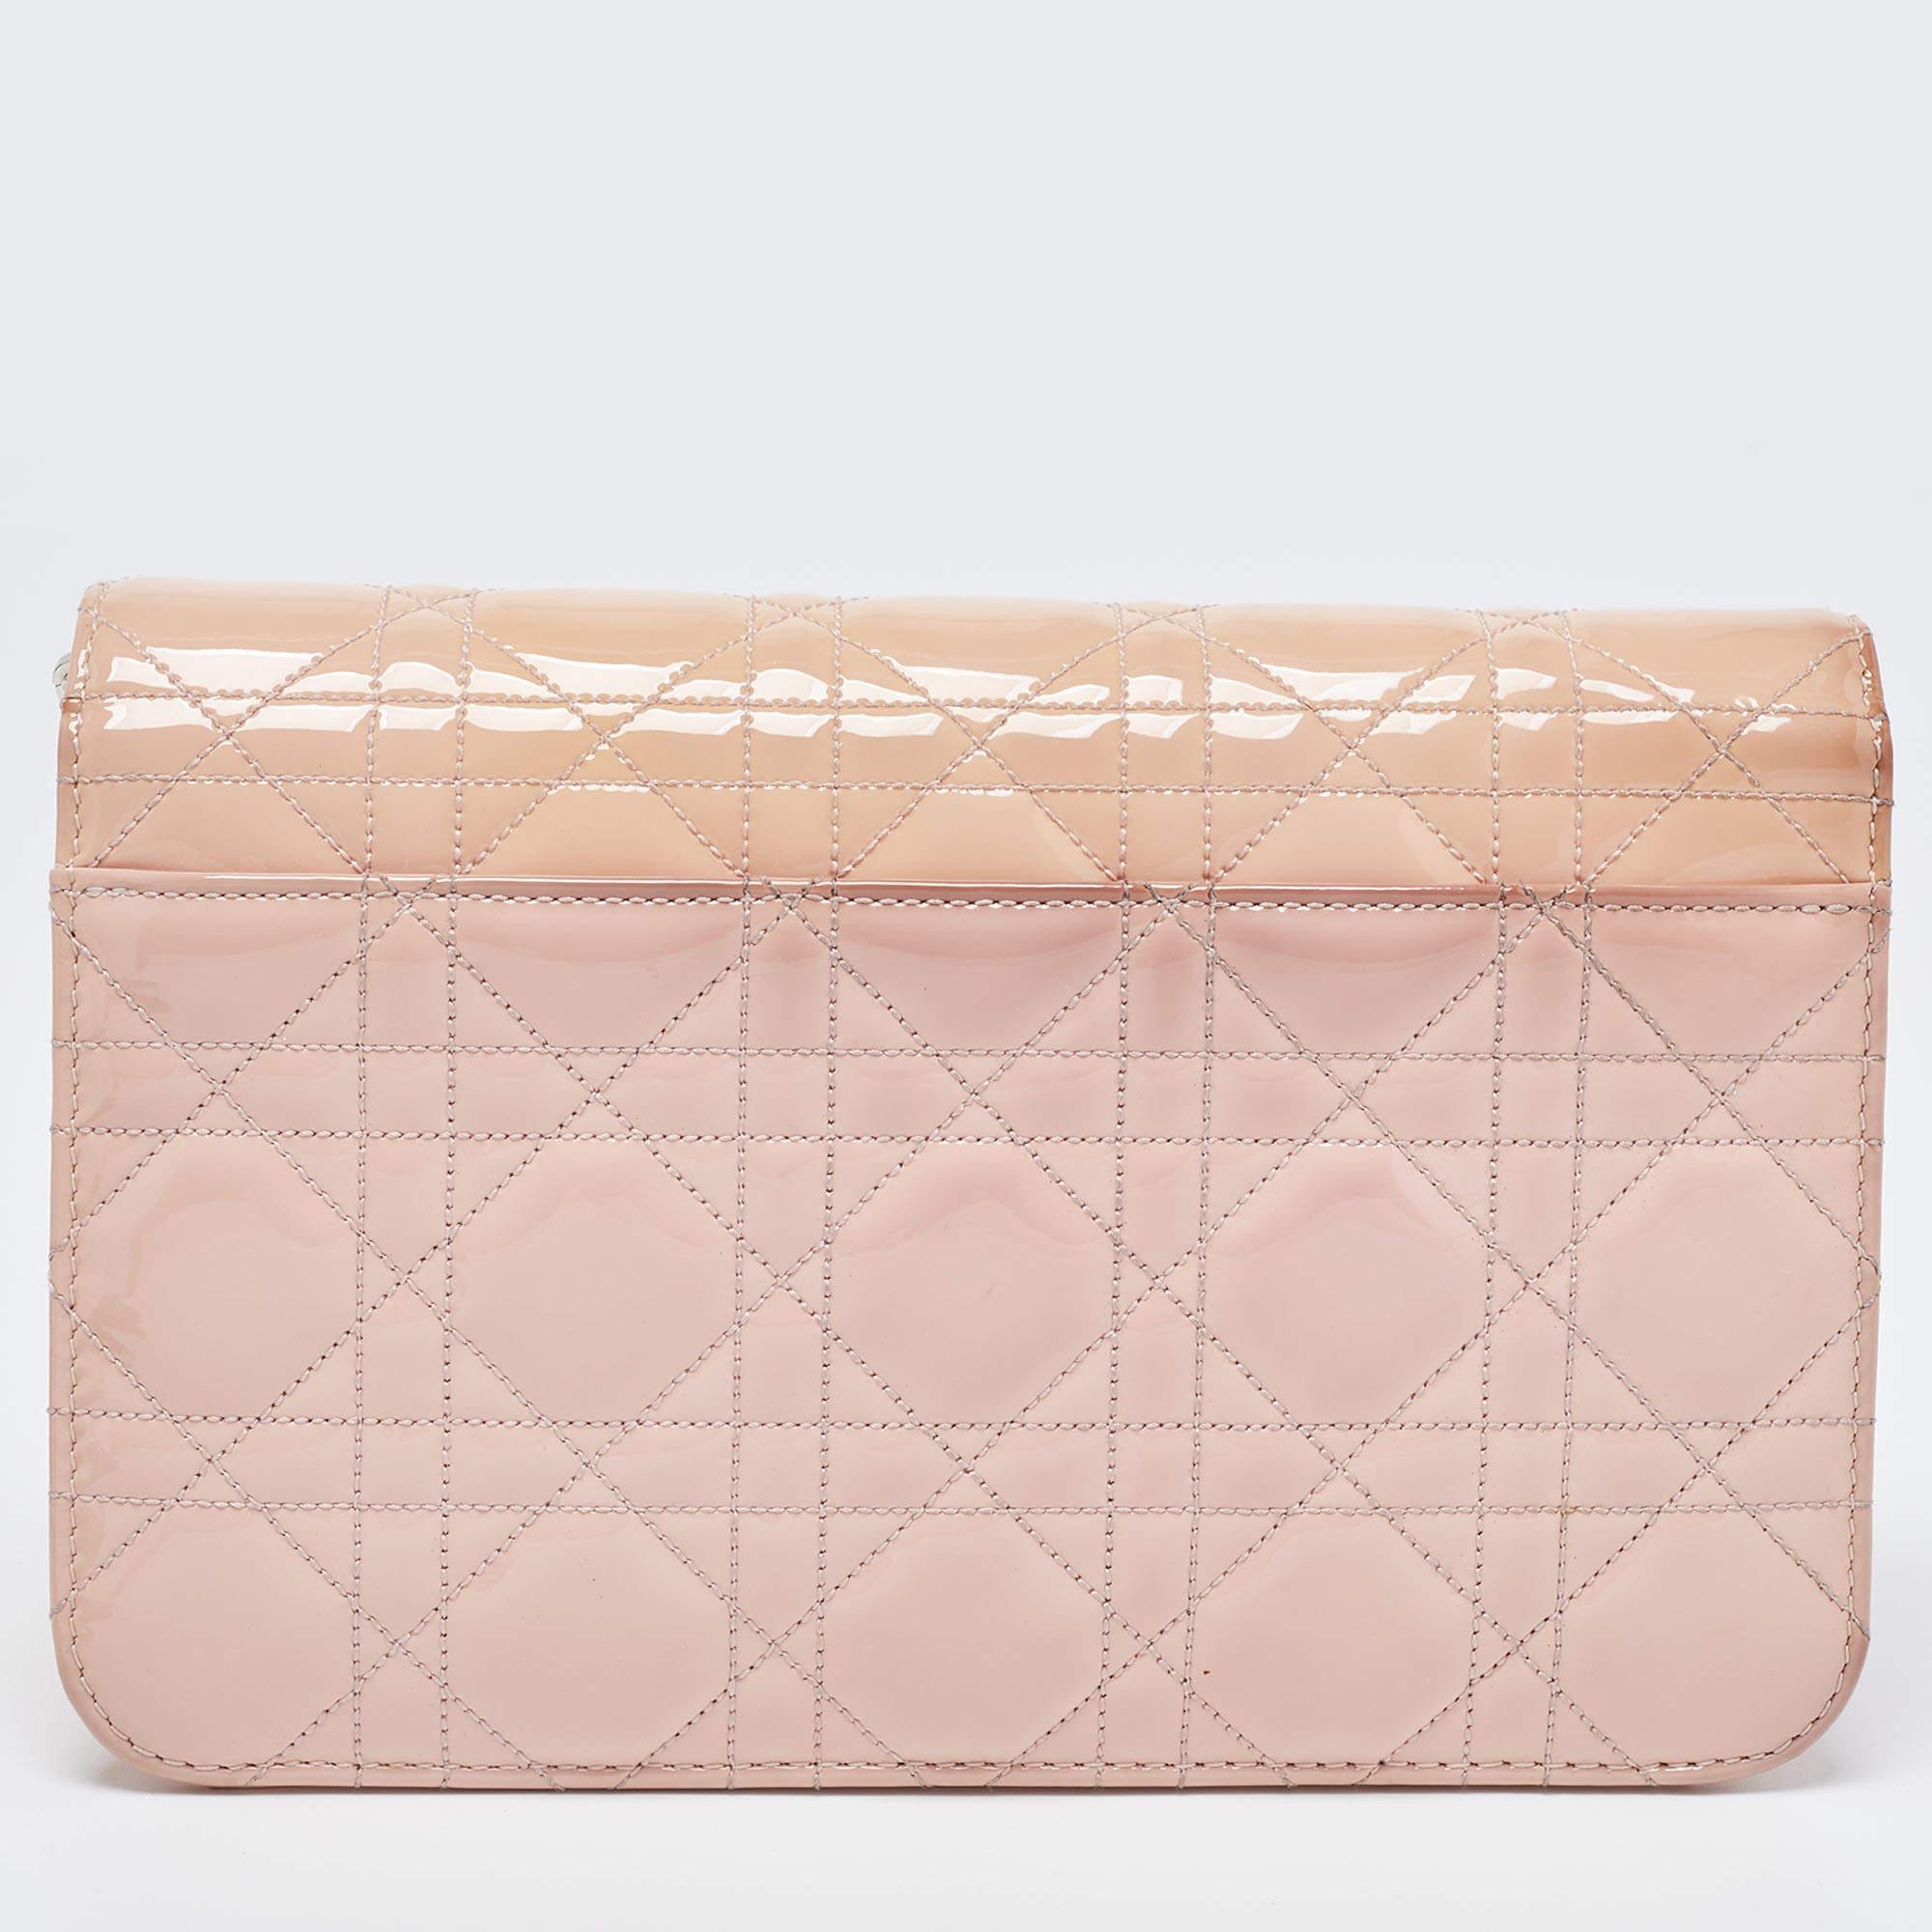 Enriched with striking elements, the appeal of this Dior Promenade bag is truly ever-lasting. The nylon and leather lined interior of this light pink creation has ideal space to accommodate your valuables, and the front flap is equipped with branded